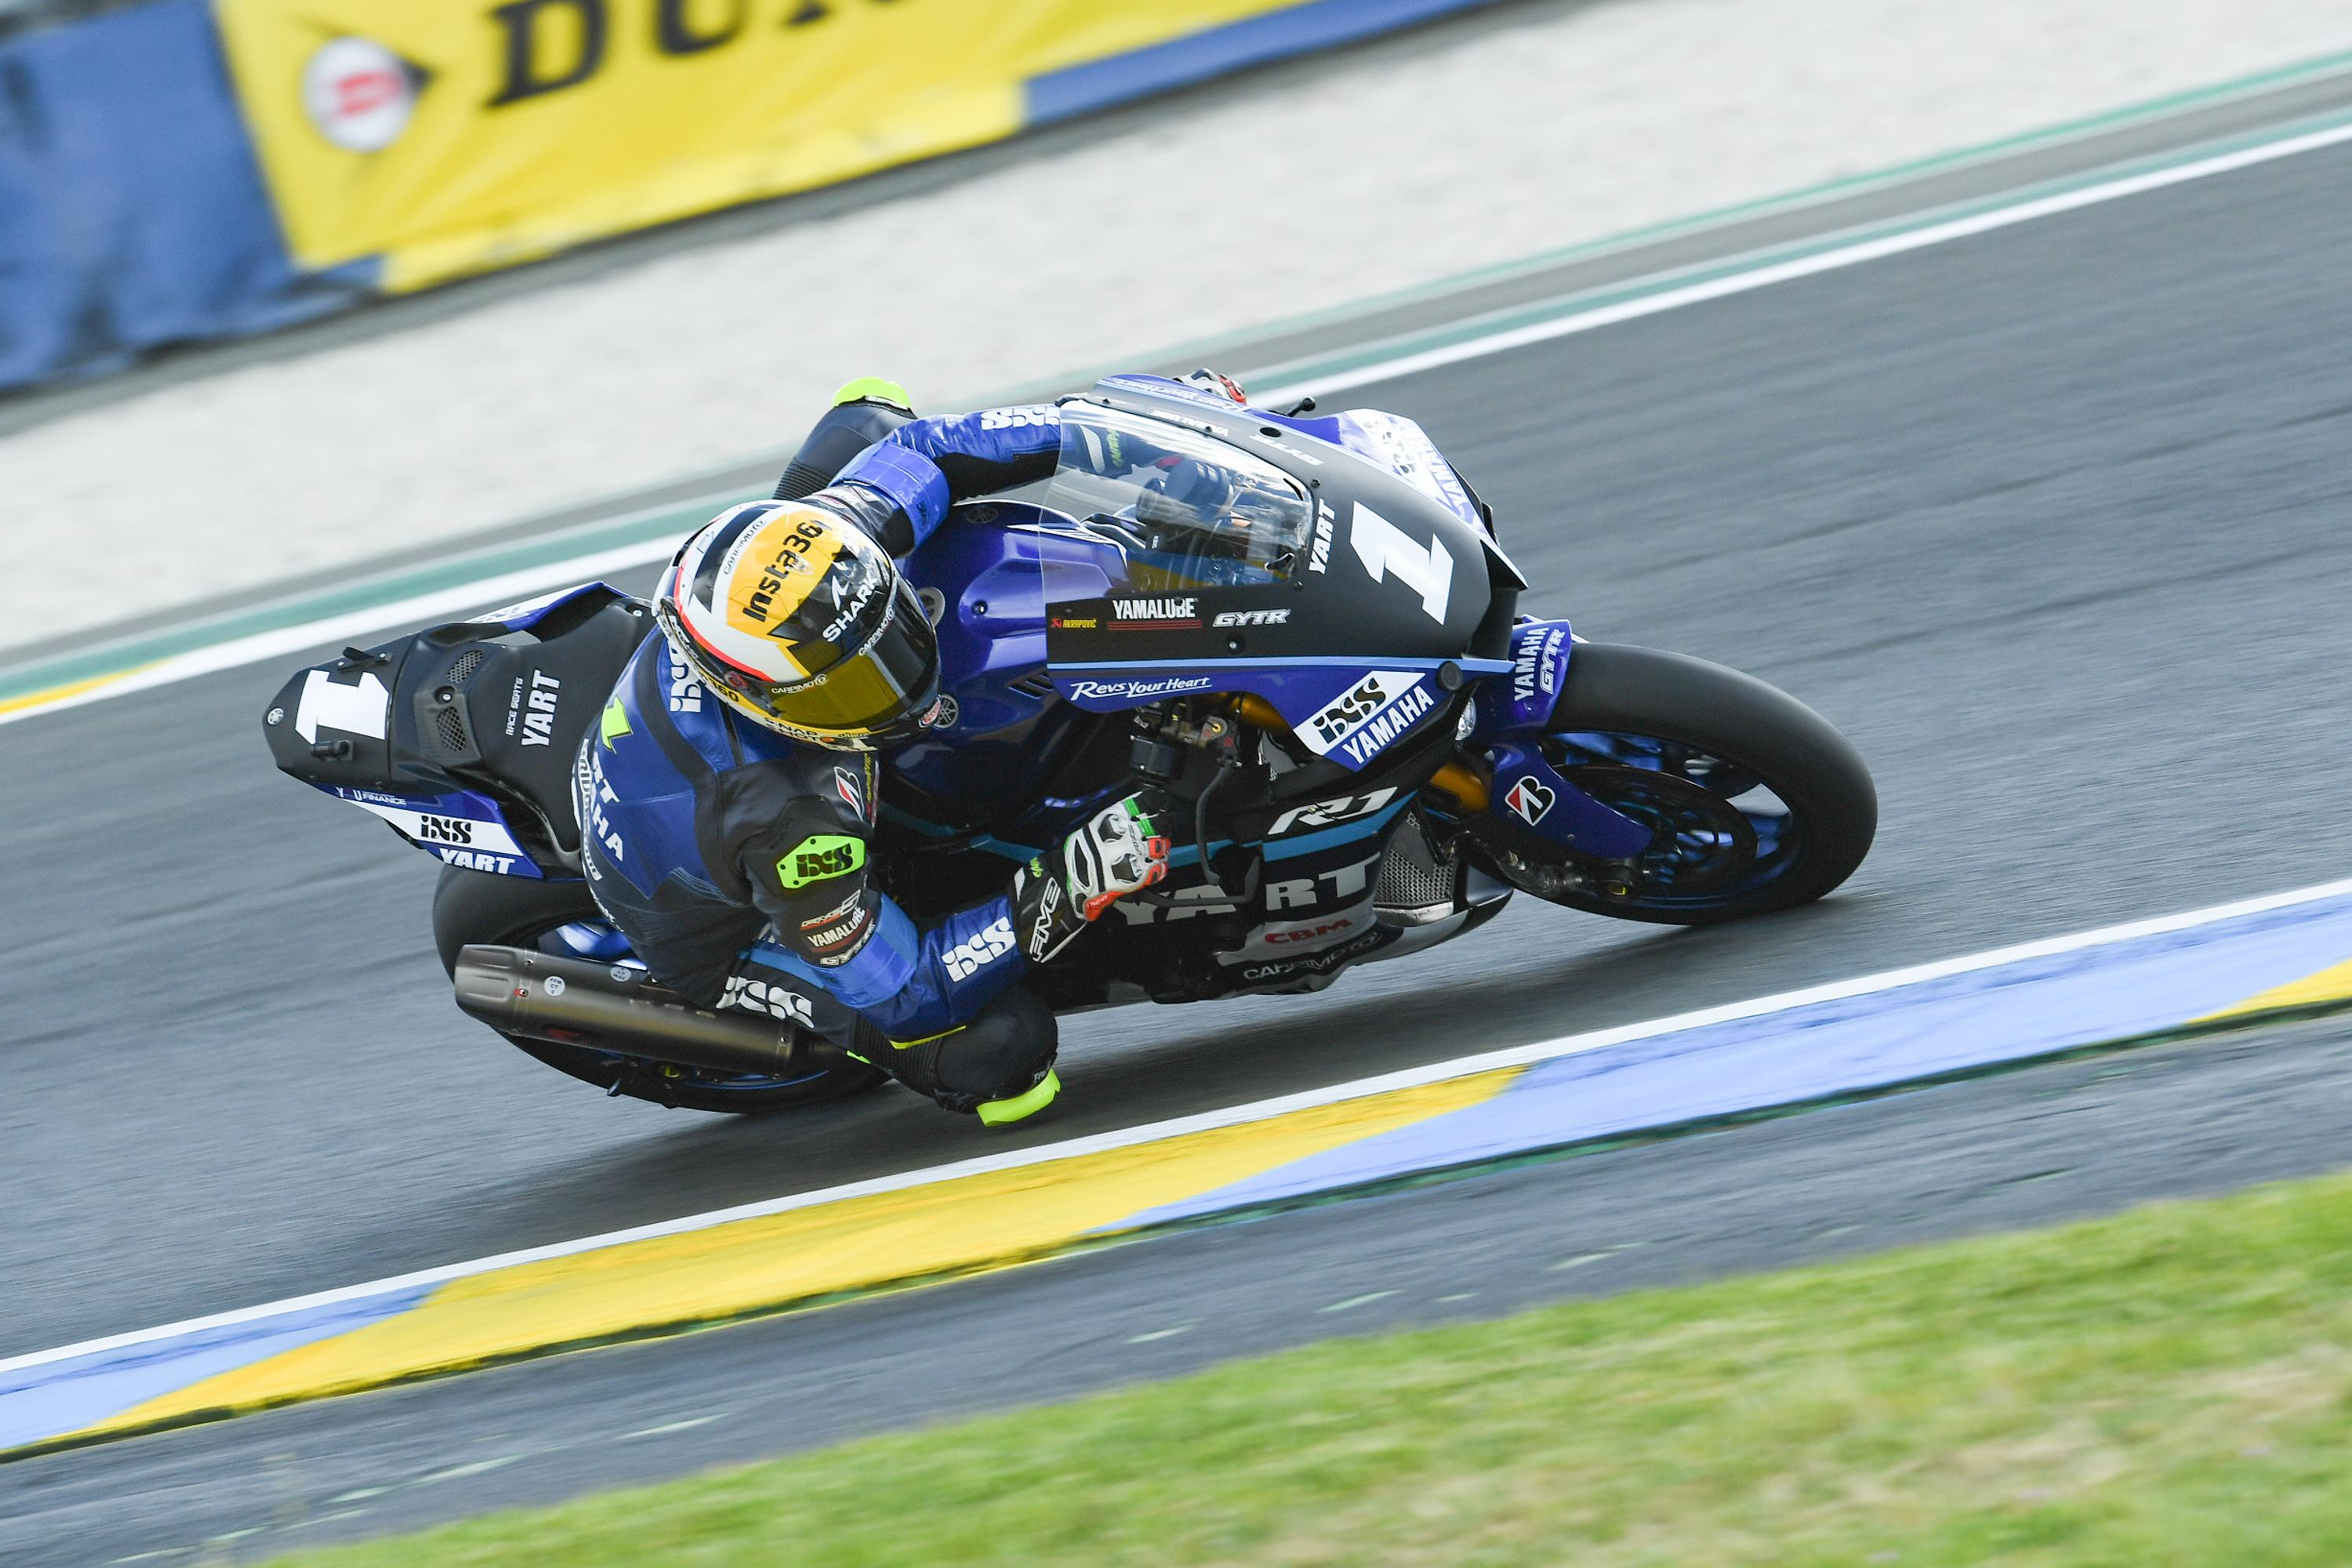 24 Heures Motos: a Yamaha at the top of the first qualifying practices